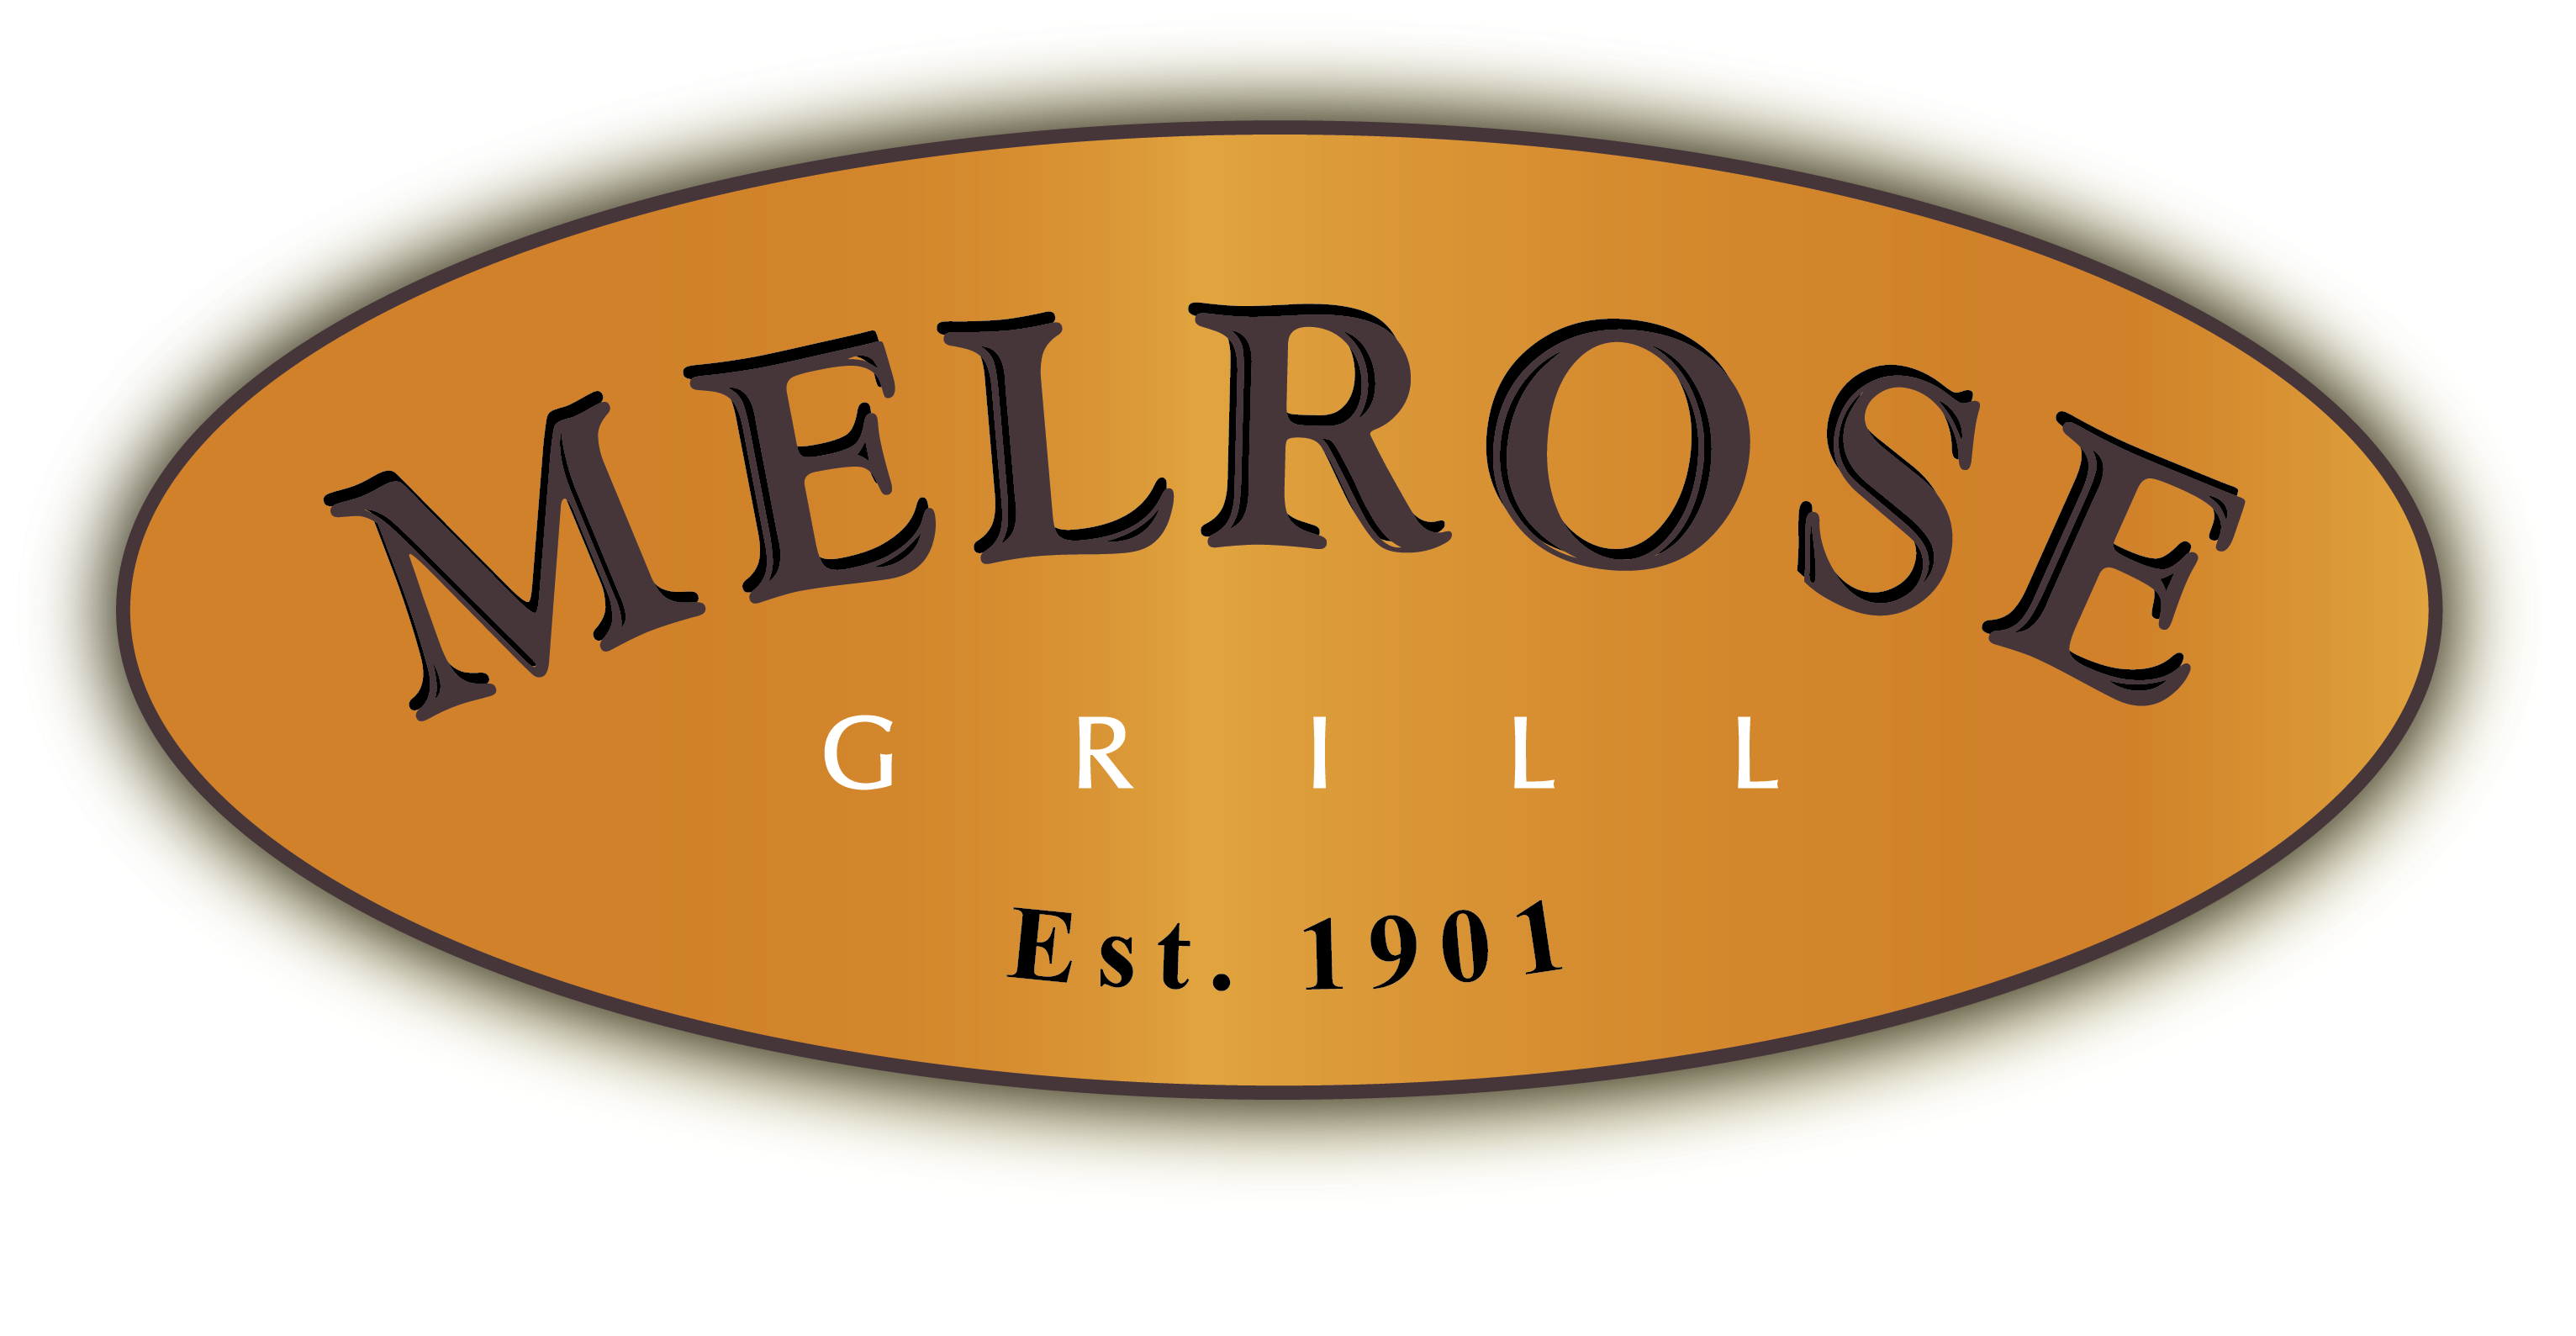 Melrose Grill